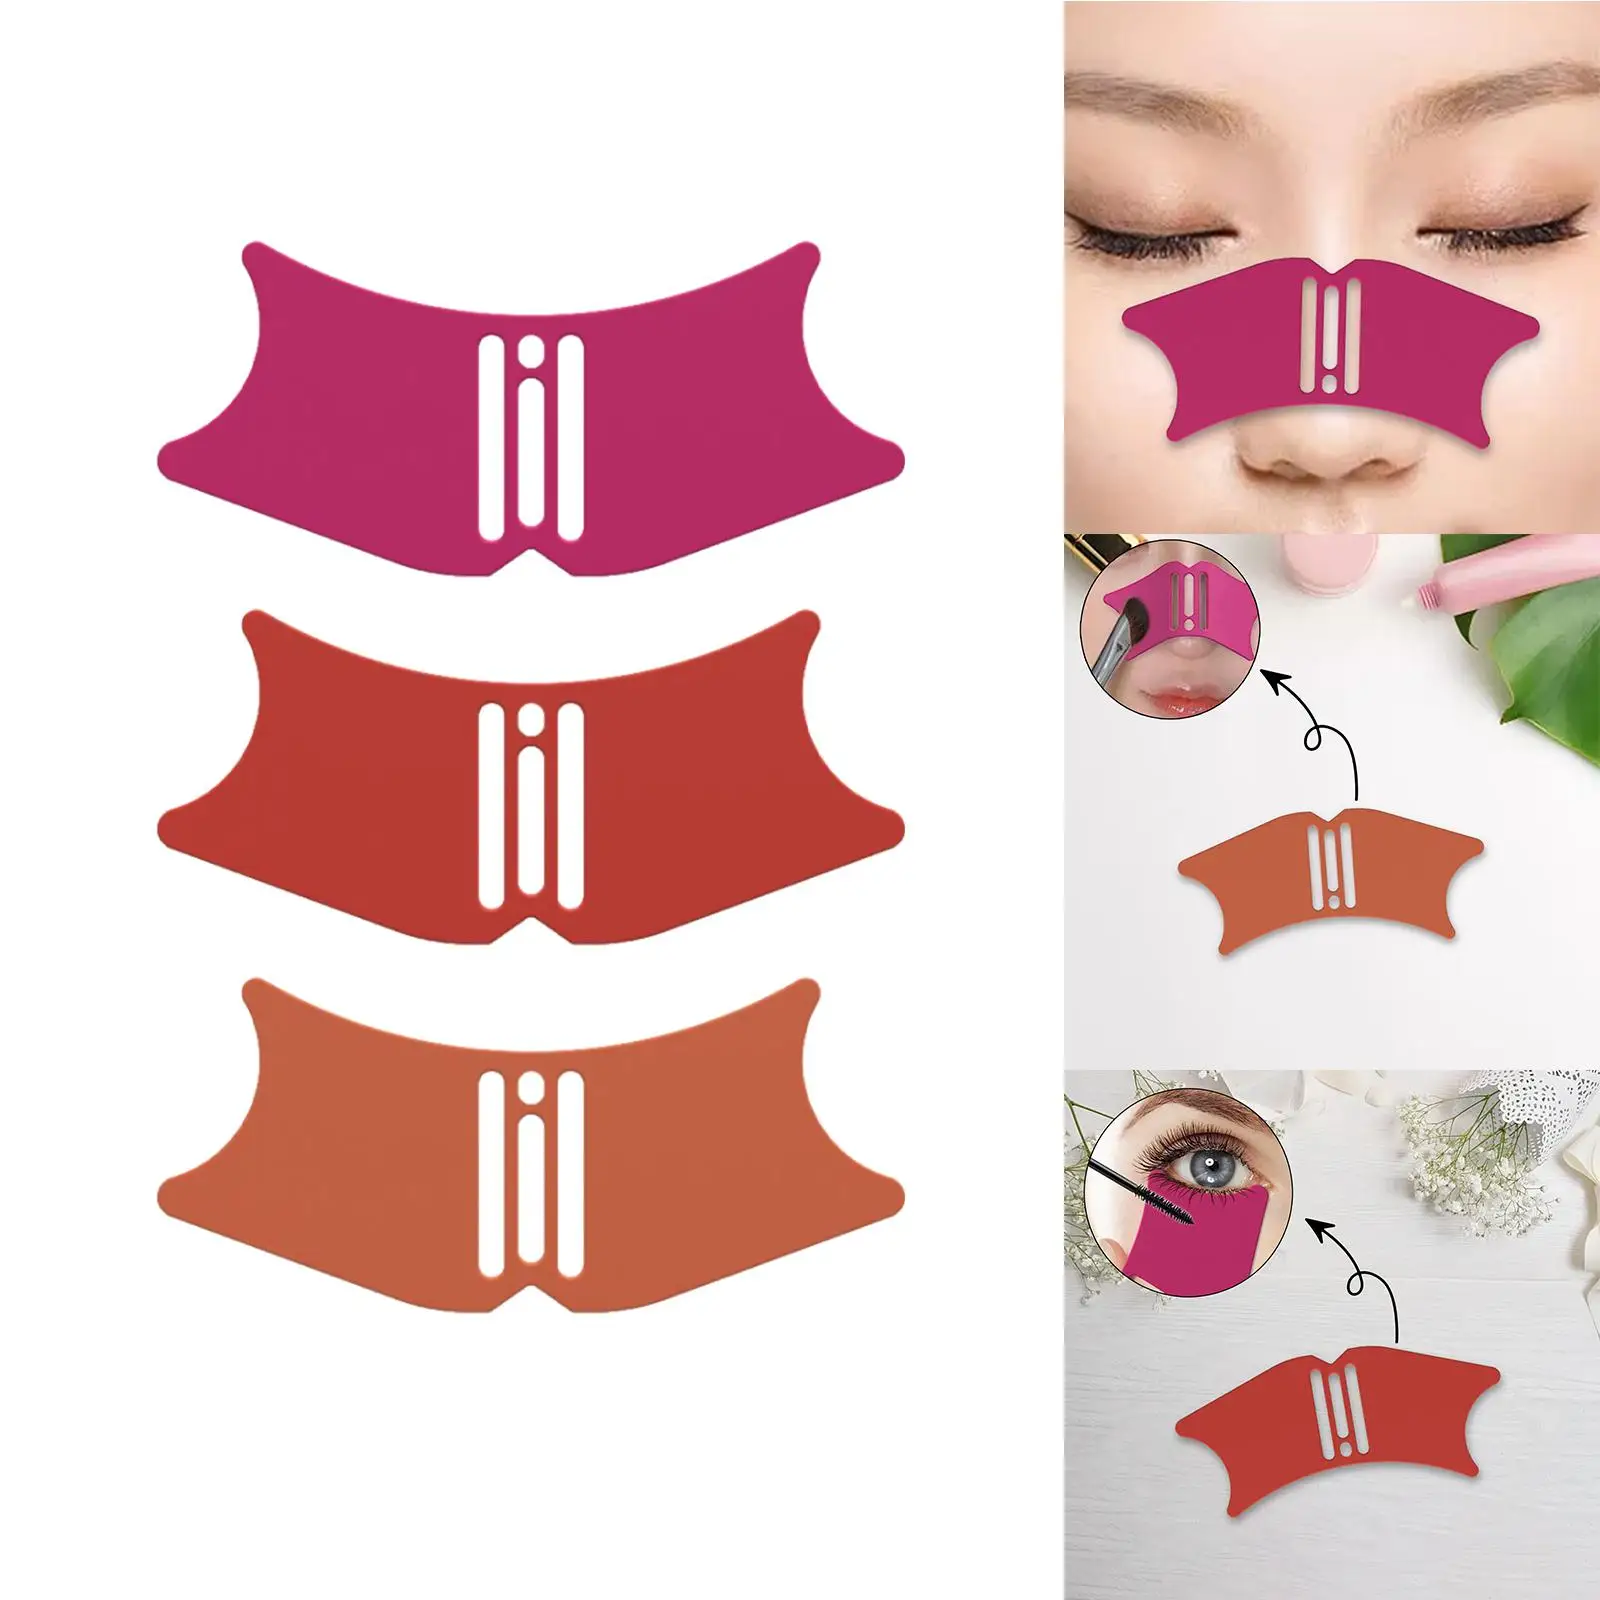 Eyebrow Shaping Stencil Silicone Makeup Tool Nose Stencil Flexible Lightweight Multifunctional Template